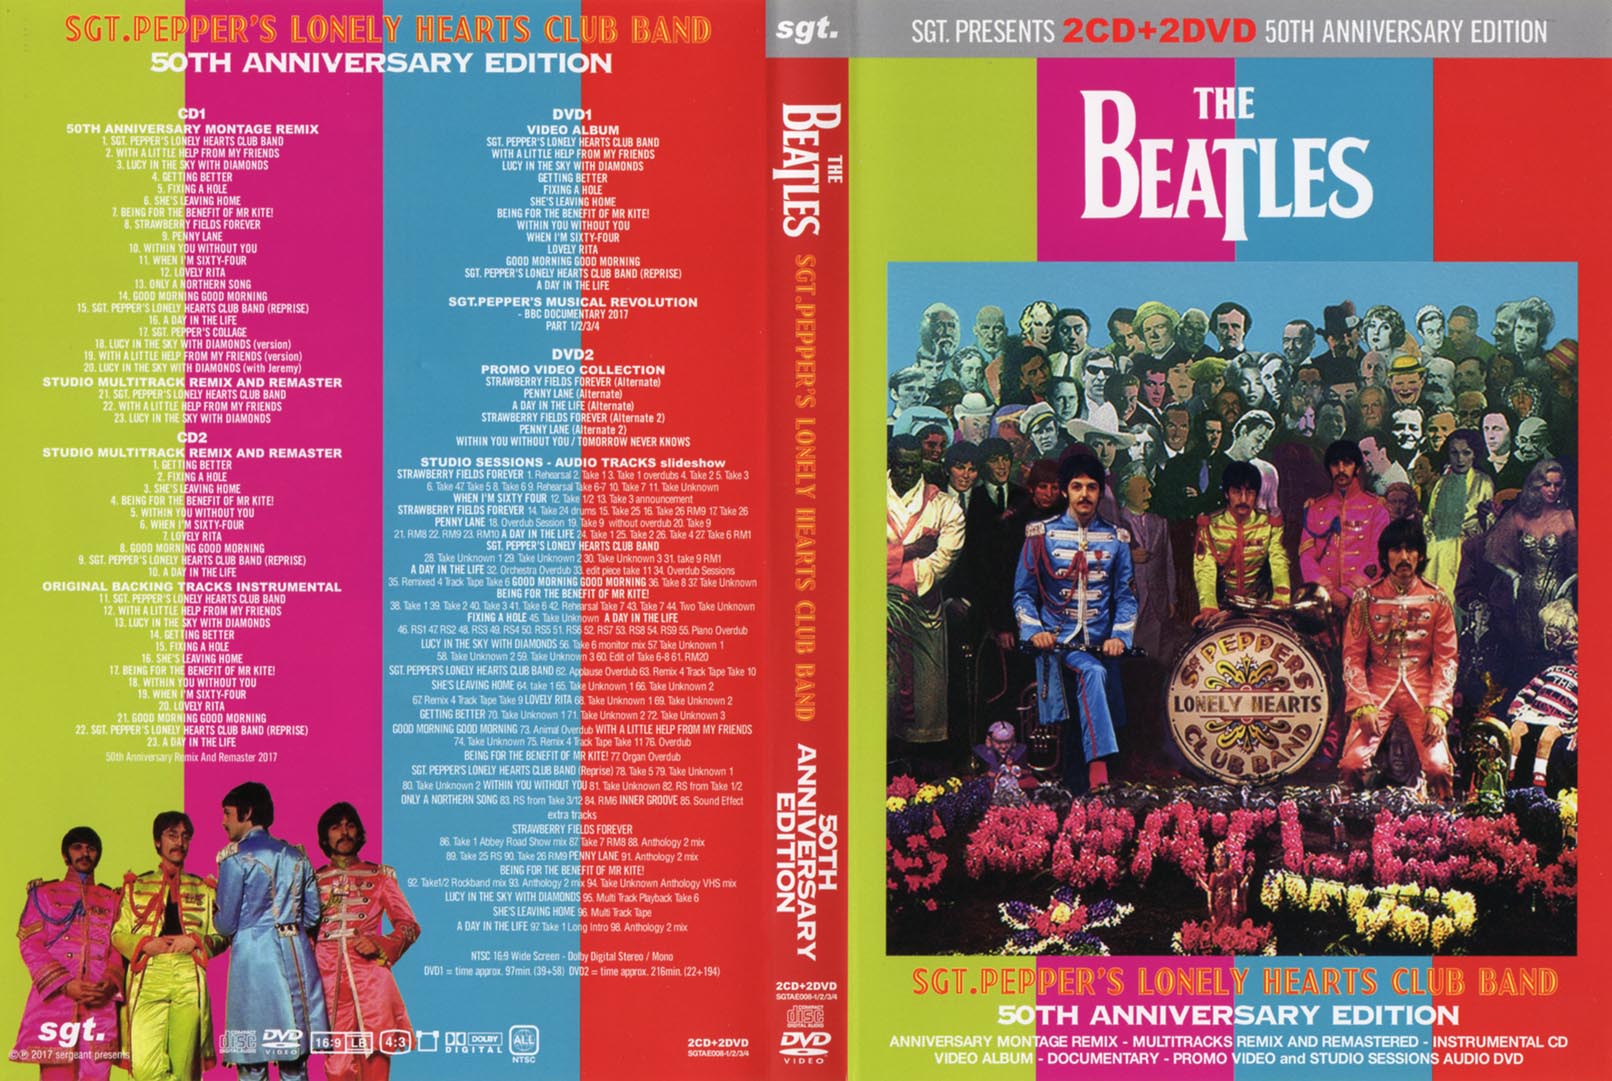 THE BEATLES – SGT. PEPPER'S LONELY HEARTS CLUB BAND / 2 CD's + 2